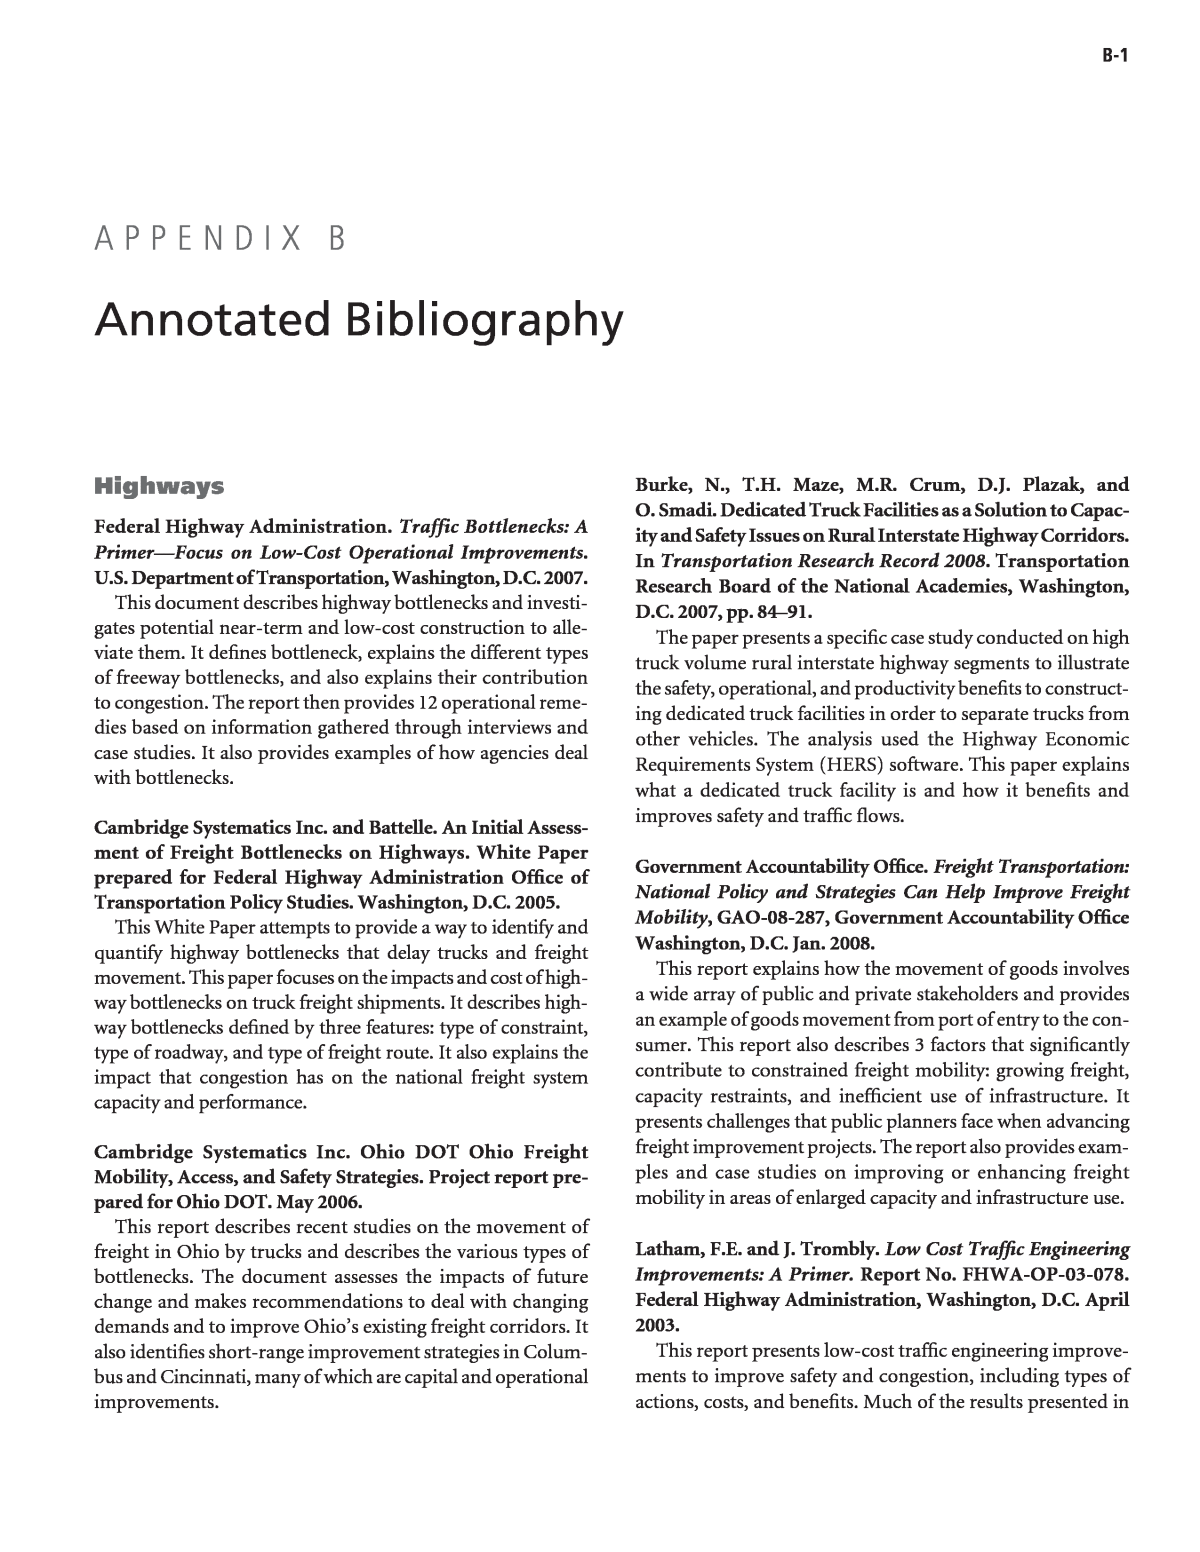 Appendix B - Annotated Bibliography  Identifying and Using Low